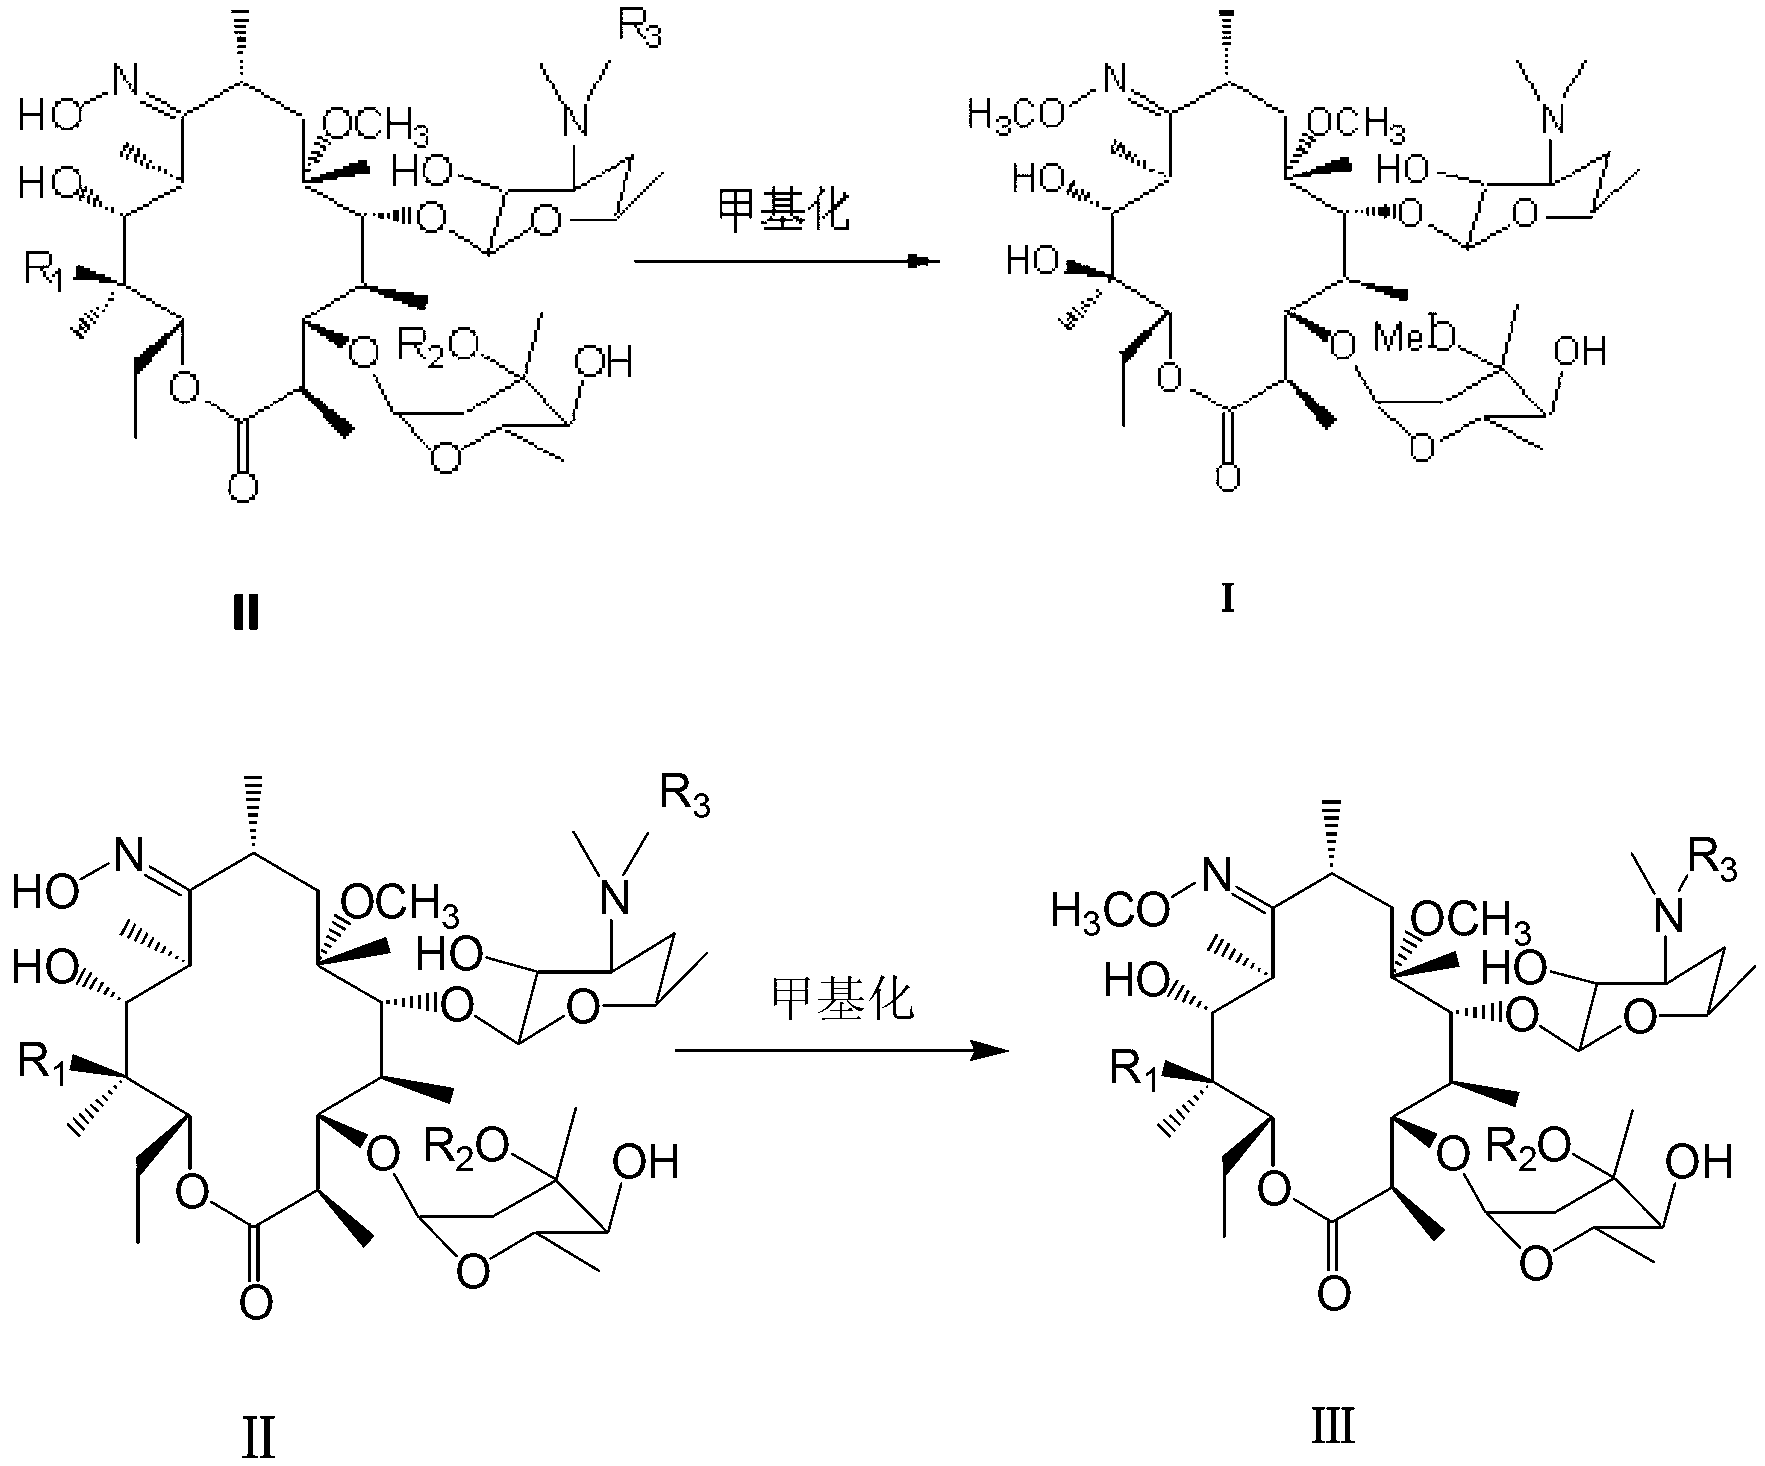 A preparation process of a clarithromycin impurity O or similar compounds